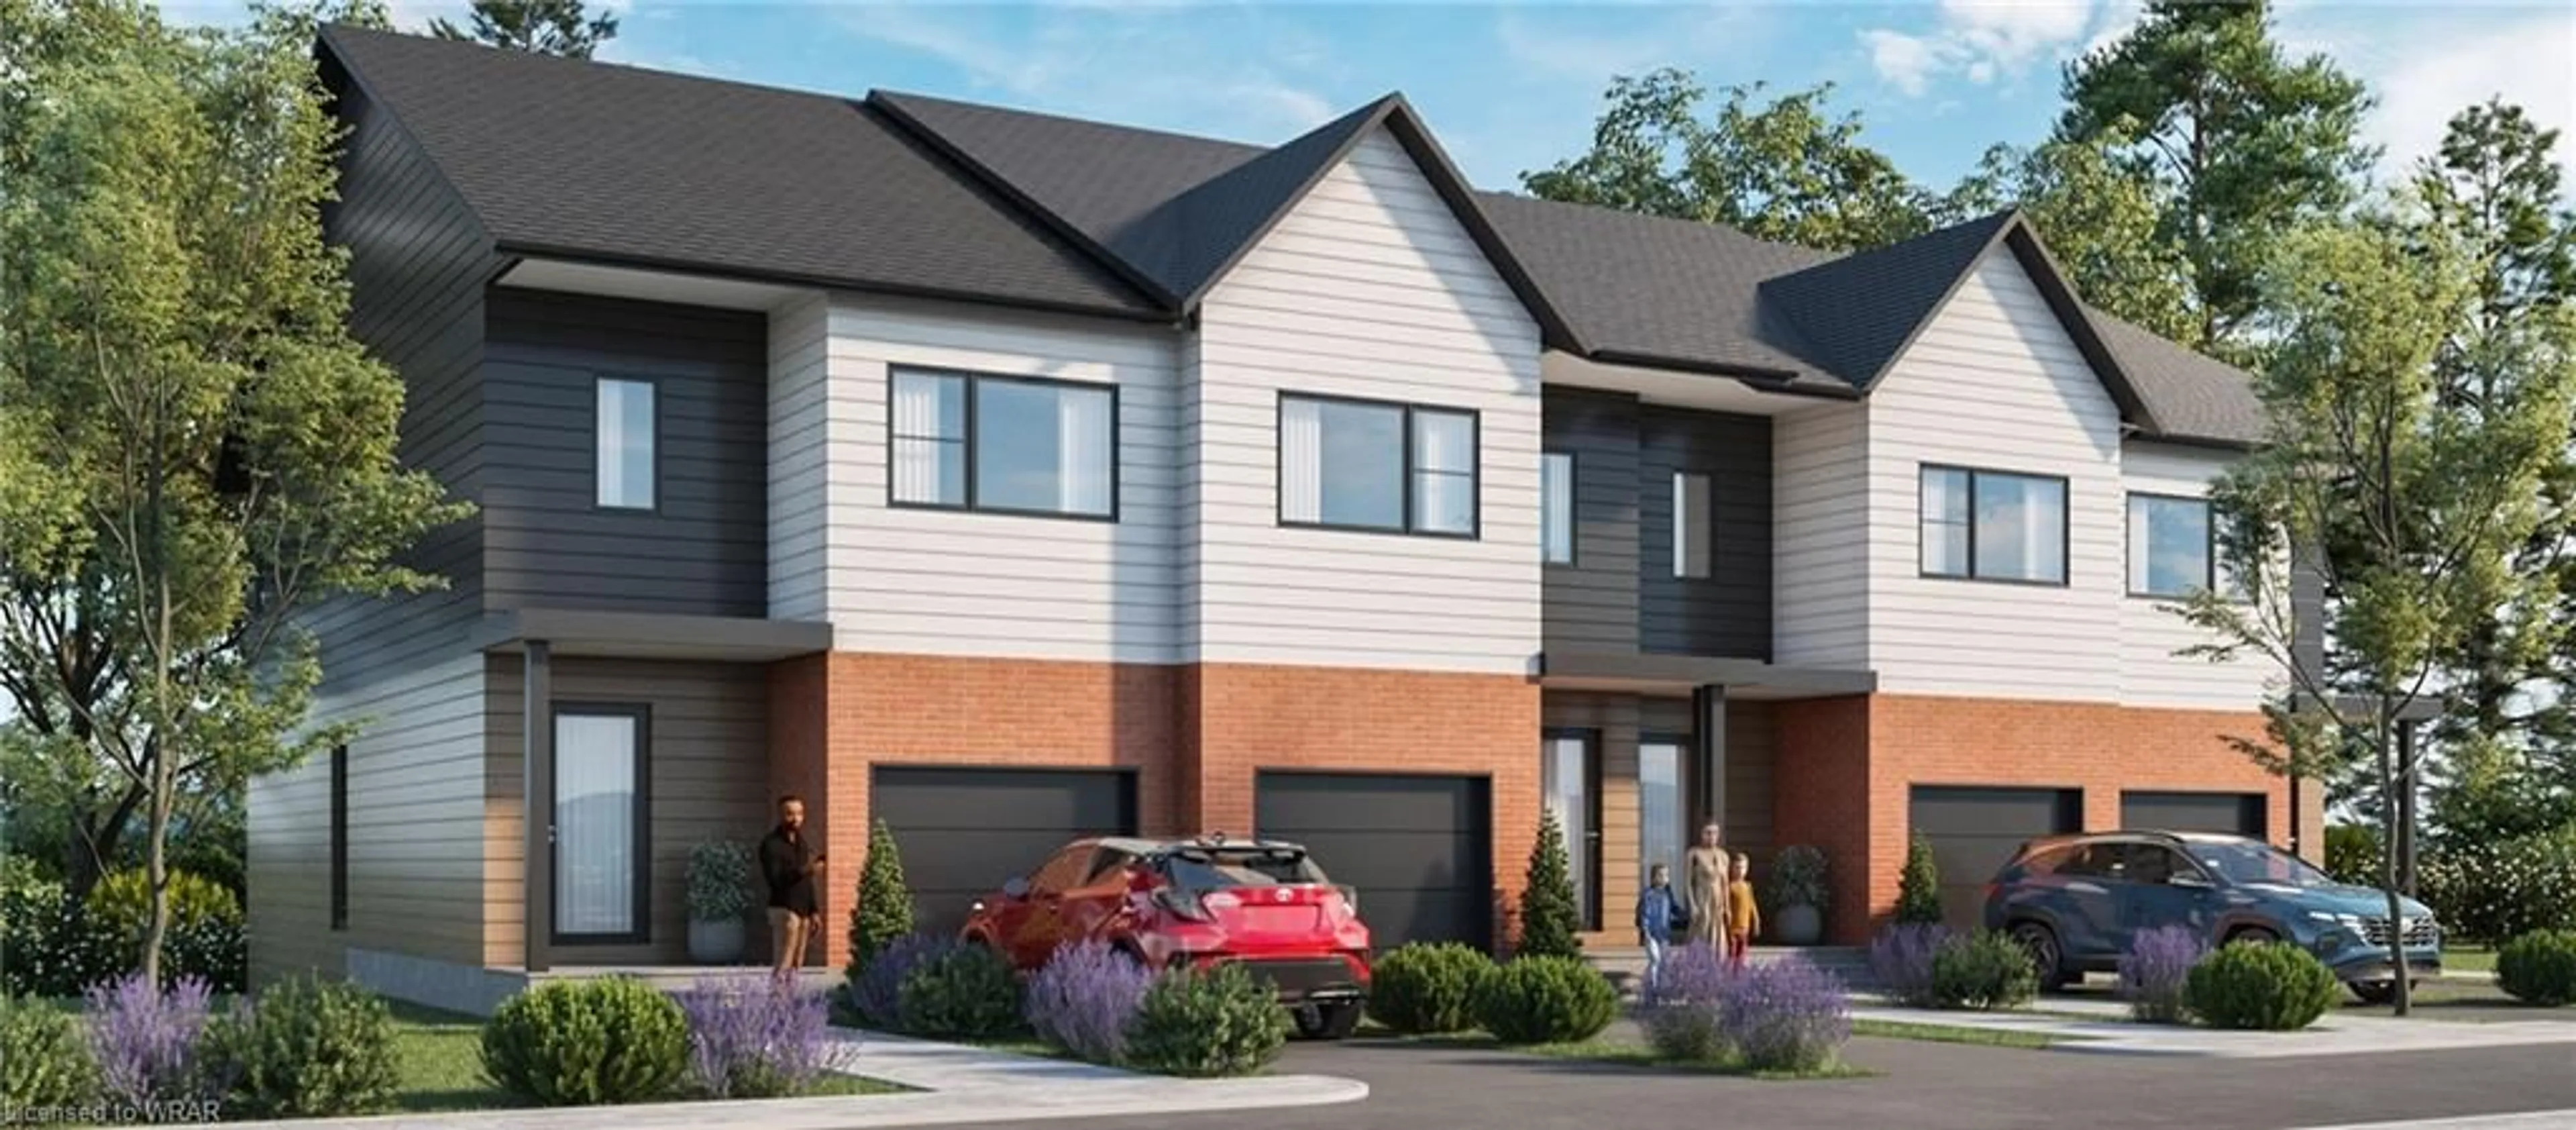 Home with brick exterior material for LOT 1 355 Guelph Ave, Cambridge Ontario N3C 2V3